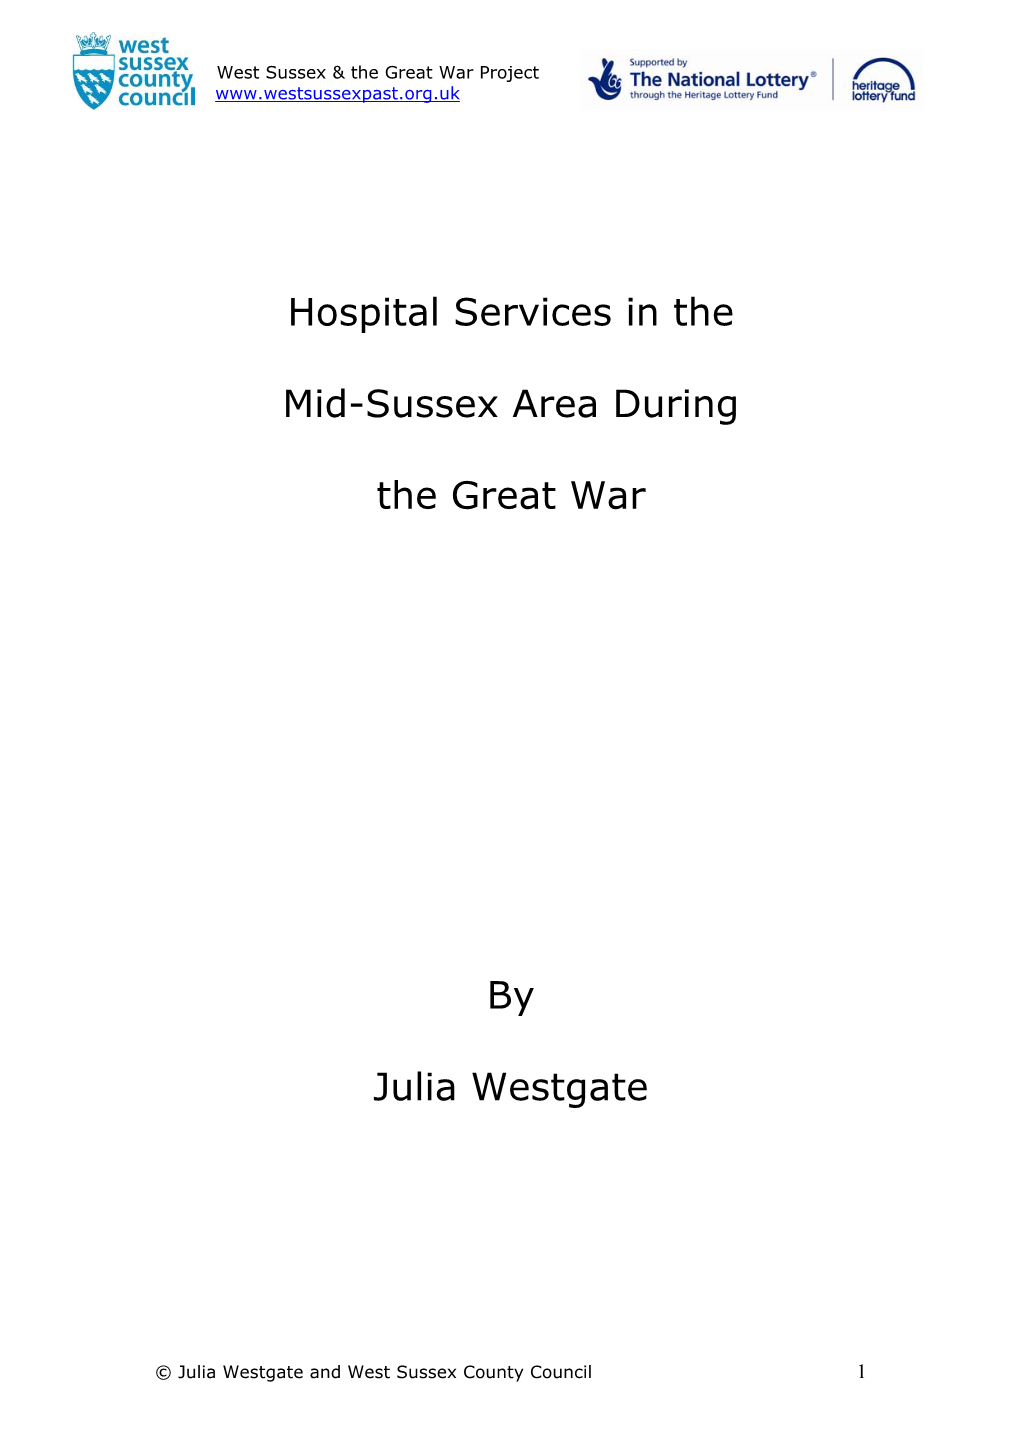 Hospital Services in the Mid-Sussex